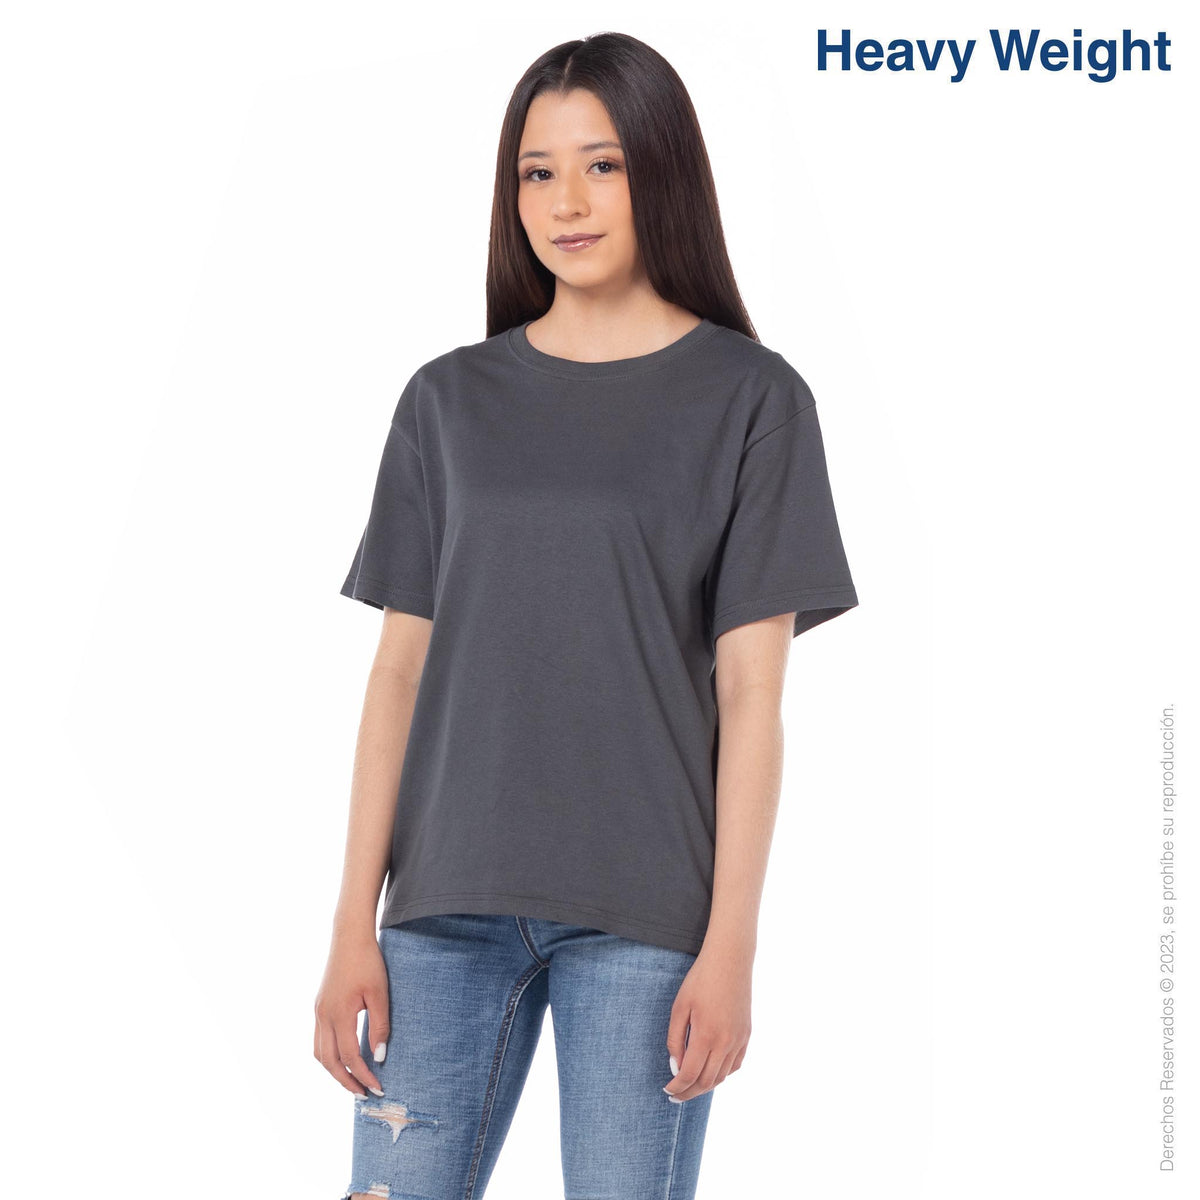 Youth’s Heavy Weight Crew Neck Short Sleeve T-Shirt (Charcoal)